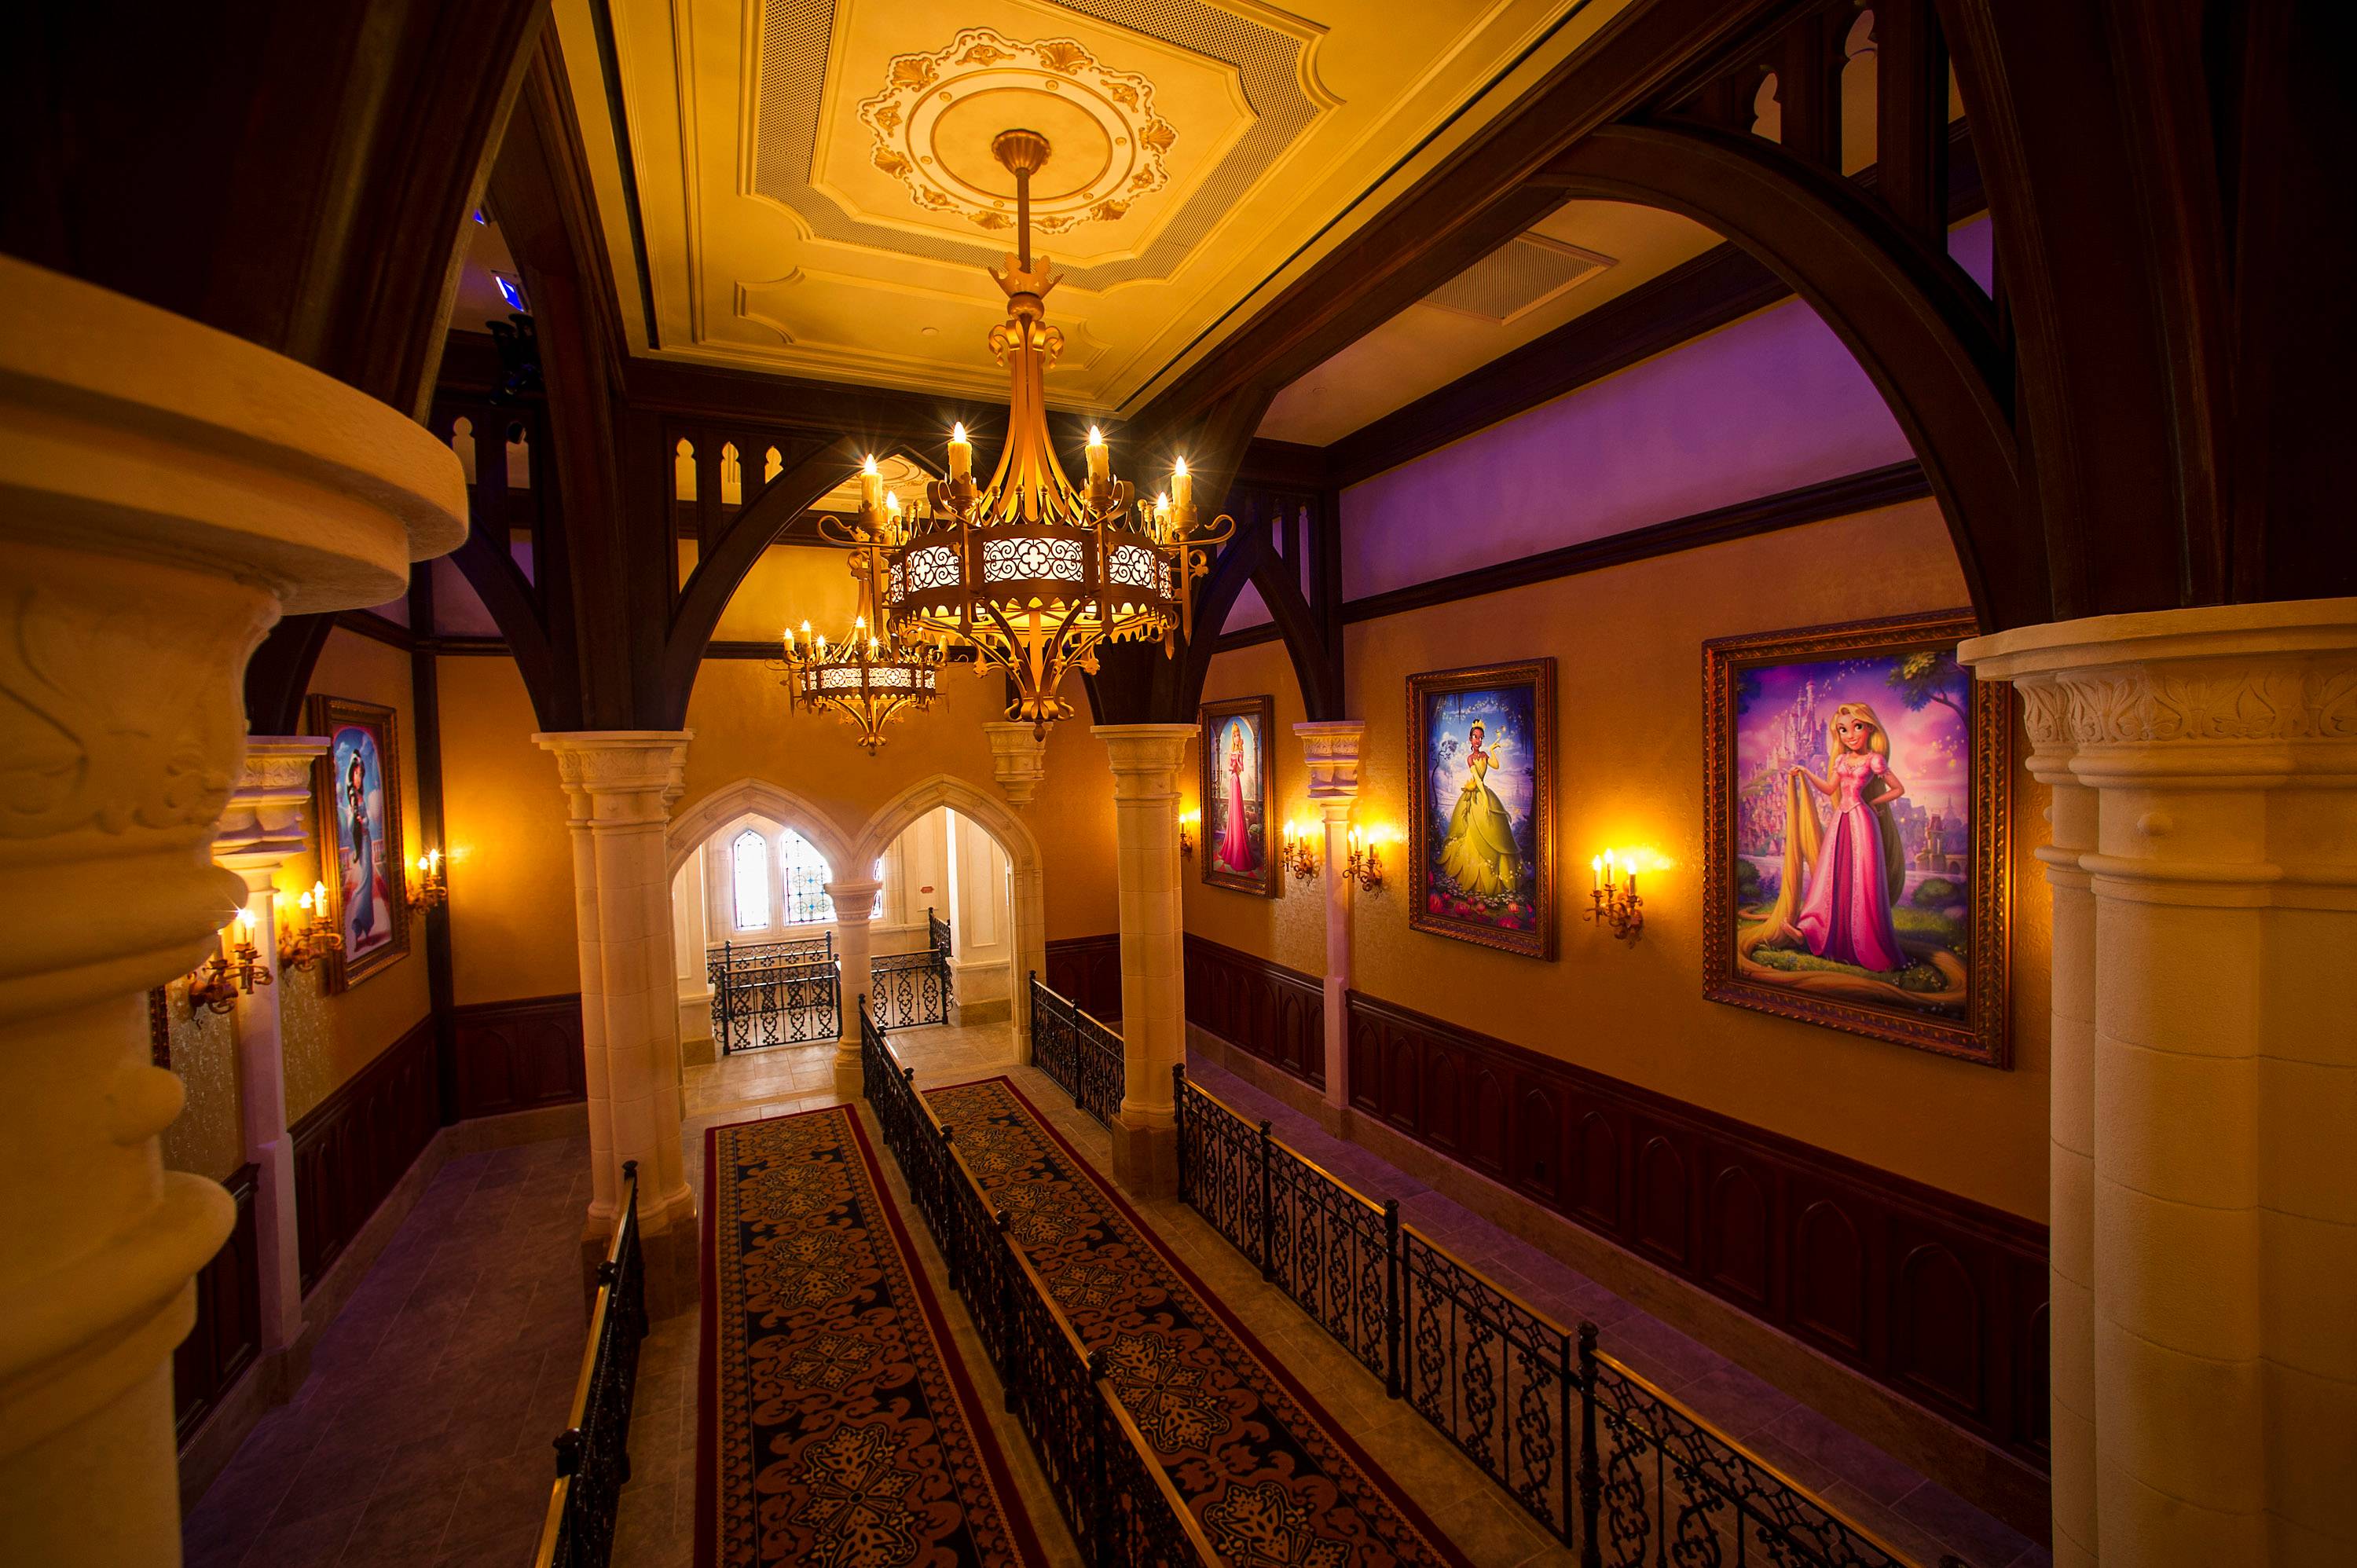 Frozen characters Elsa and Anna arrive at Princess Fairytale Hall and already waits are over 2 and a half hours